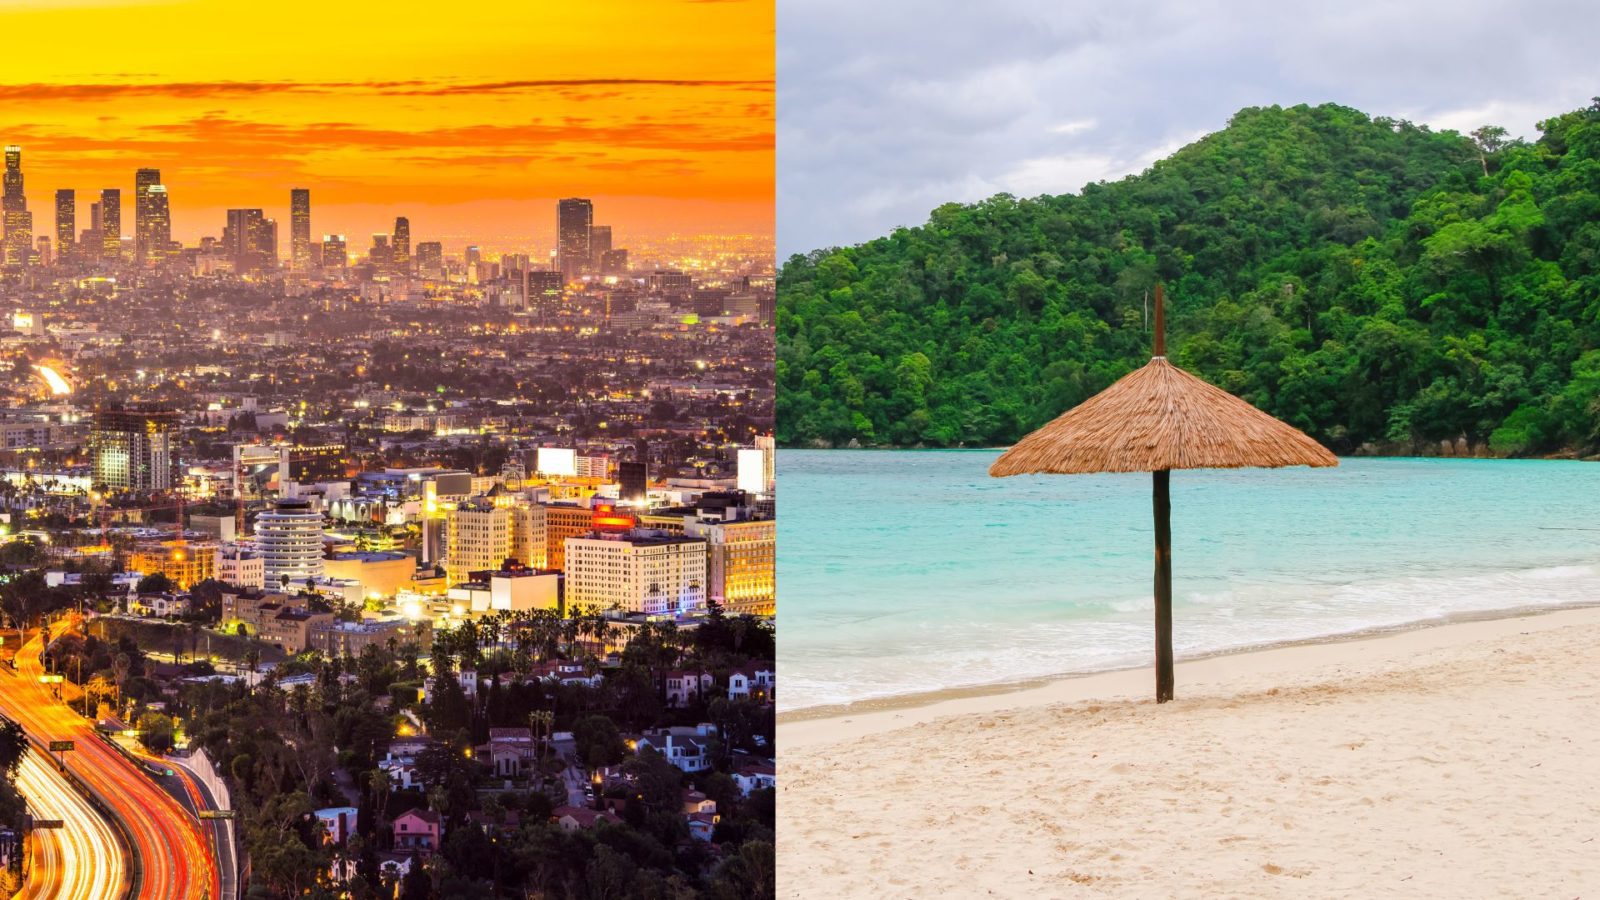 Split image showing rush hour at sunset in Los Angeles on the left and a single umbrella on a Cayman Island beach on the right